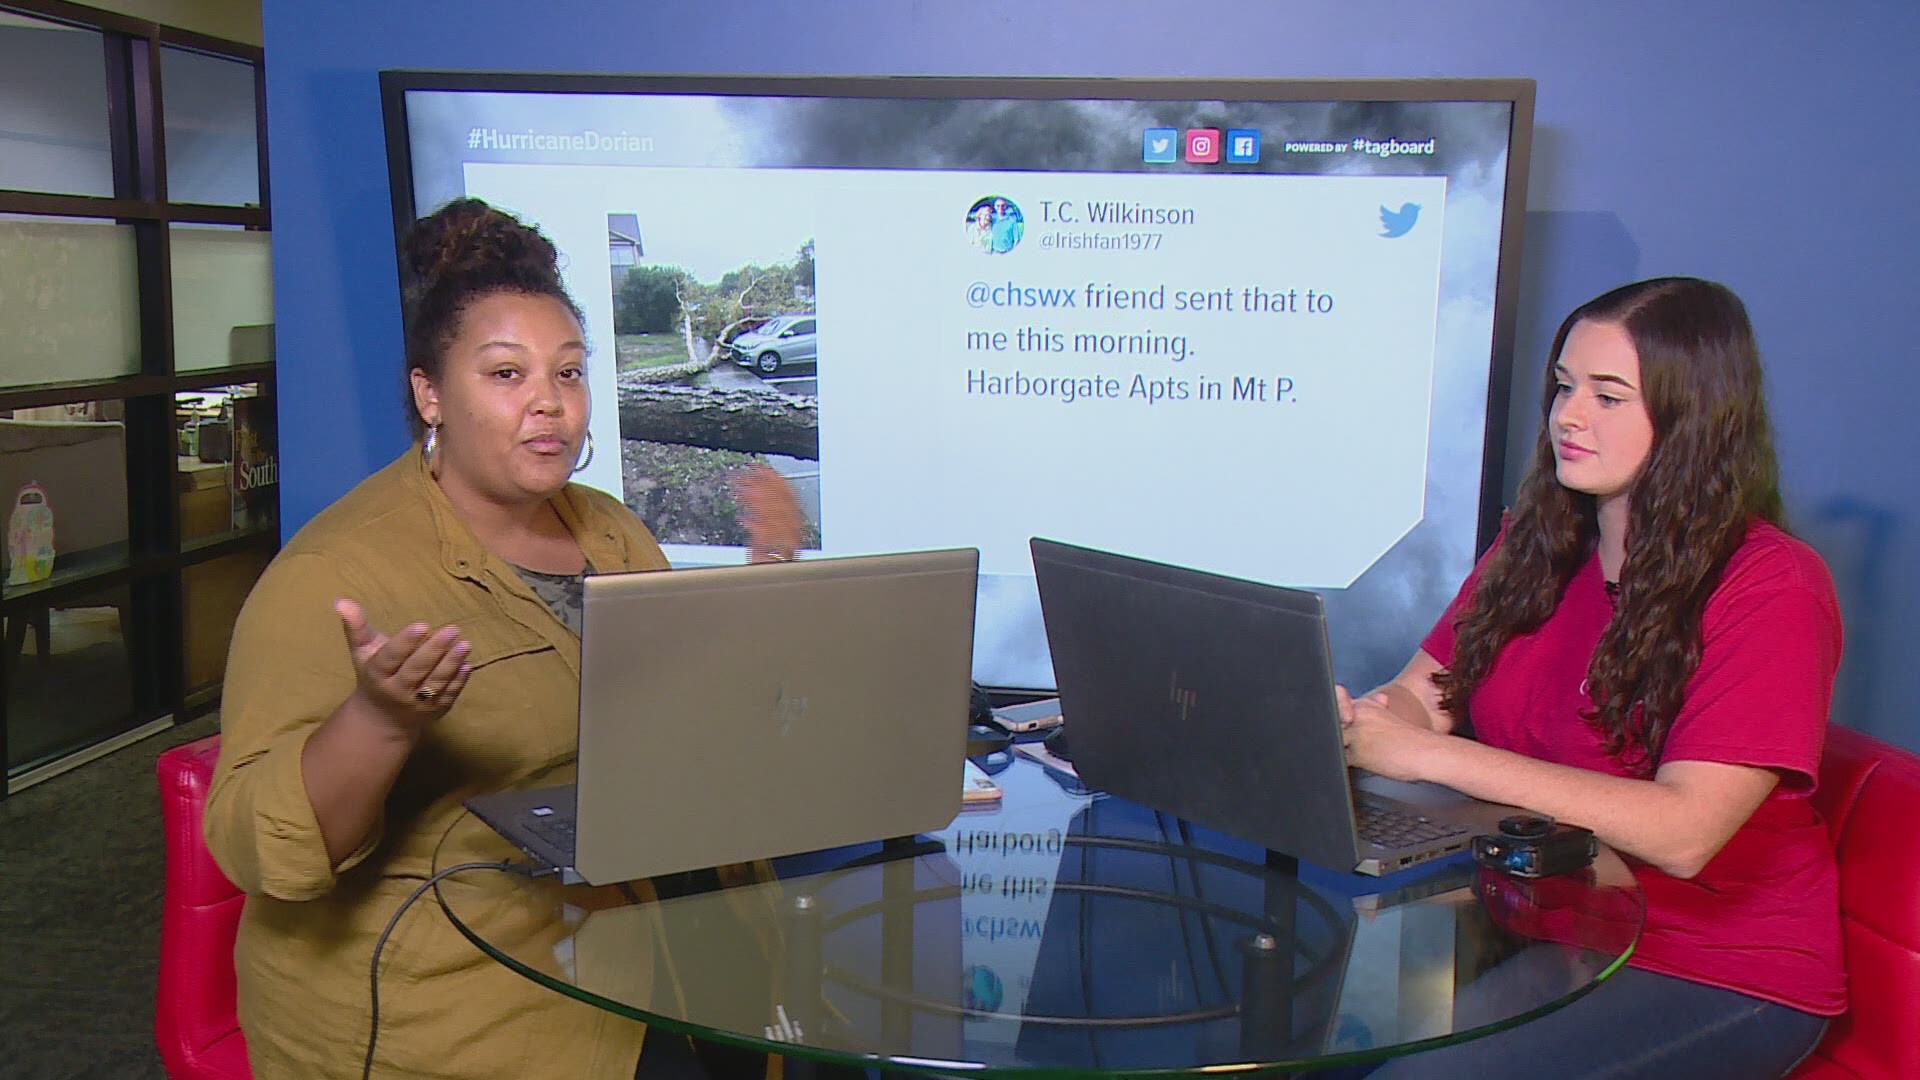 The News 19 team takes a look at Hurricane Dorian through your social media posts.